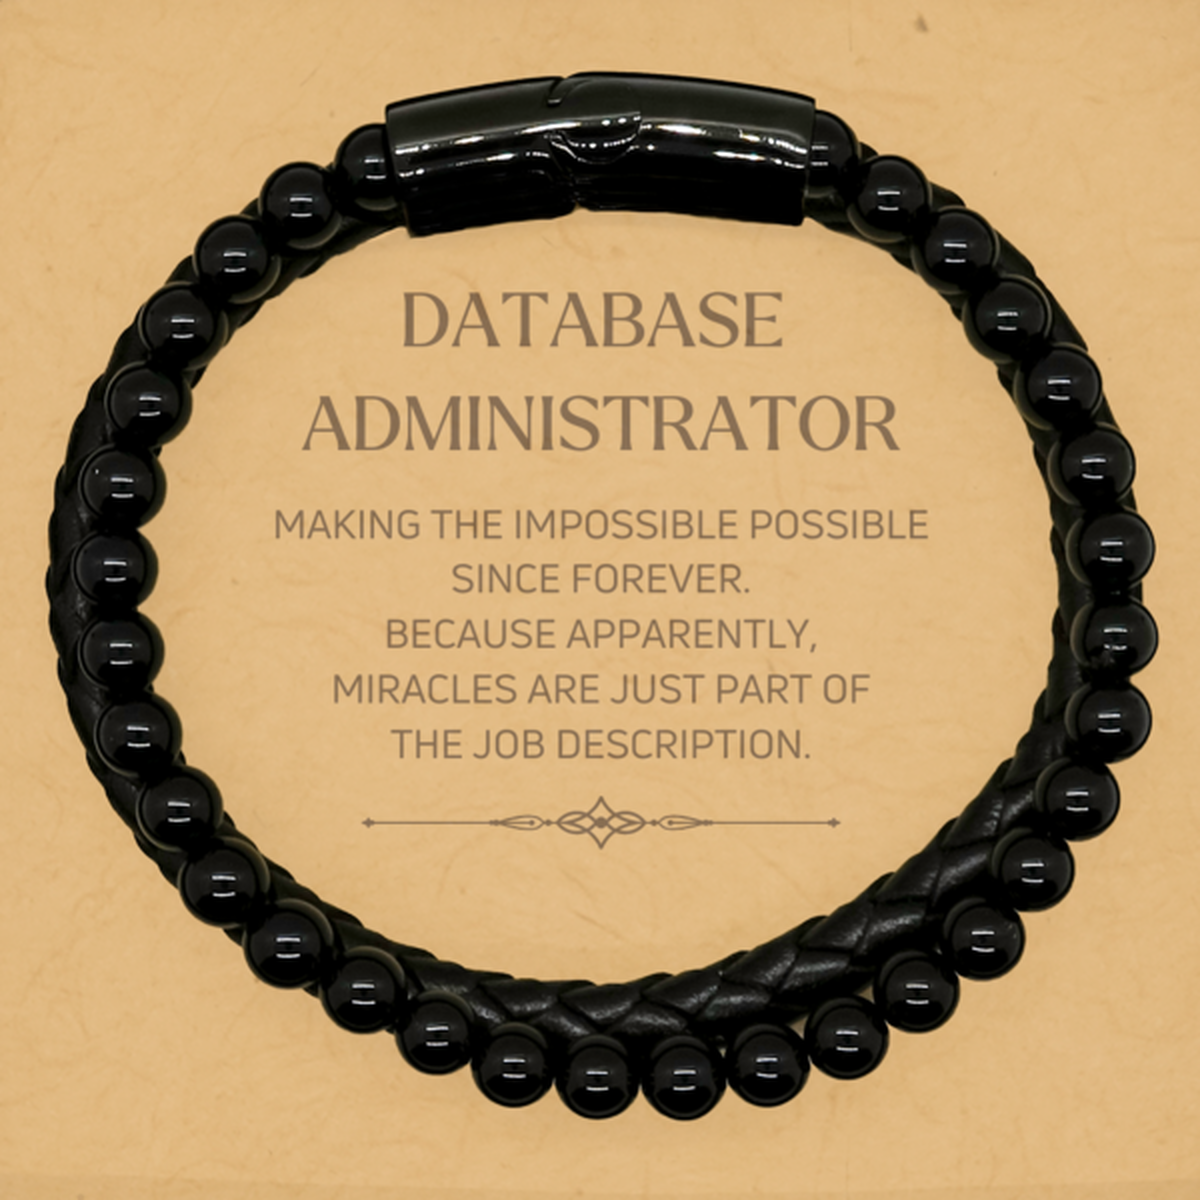 Funny Database Administrator Gifts, Miracles are just part of the job description, Inspirational Birthday Stone Leather Bracelets For Database Administrator, Men, Women, Coworkers, Friends, Boss